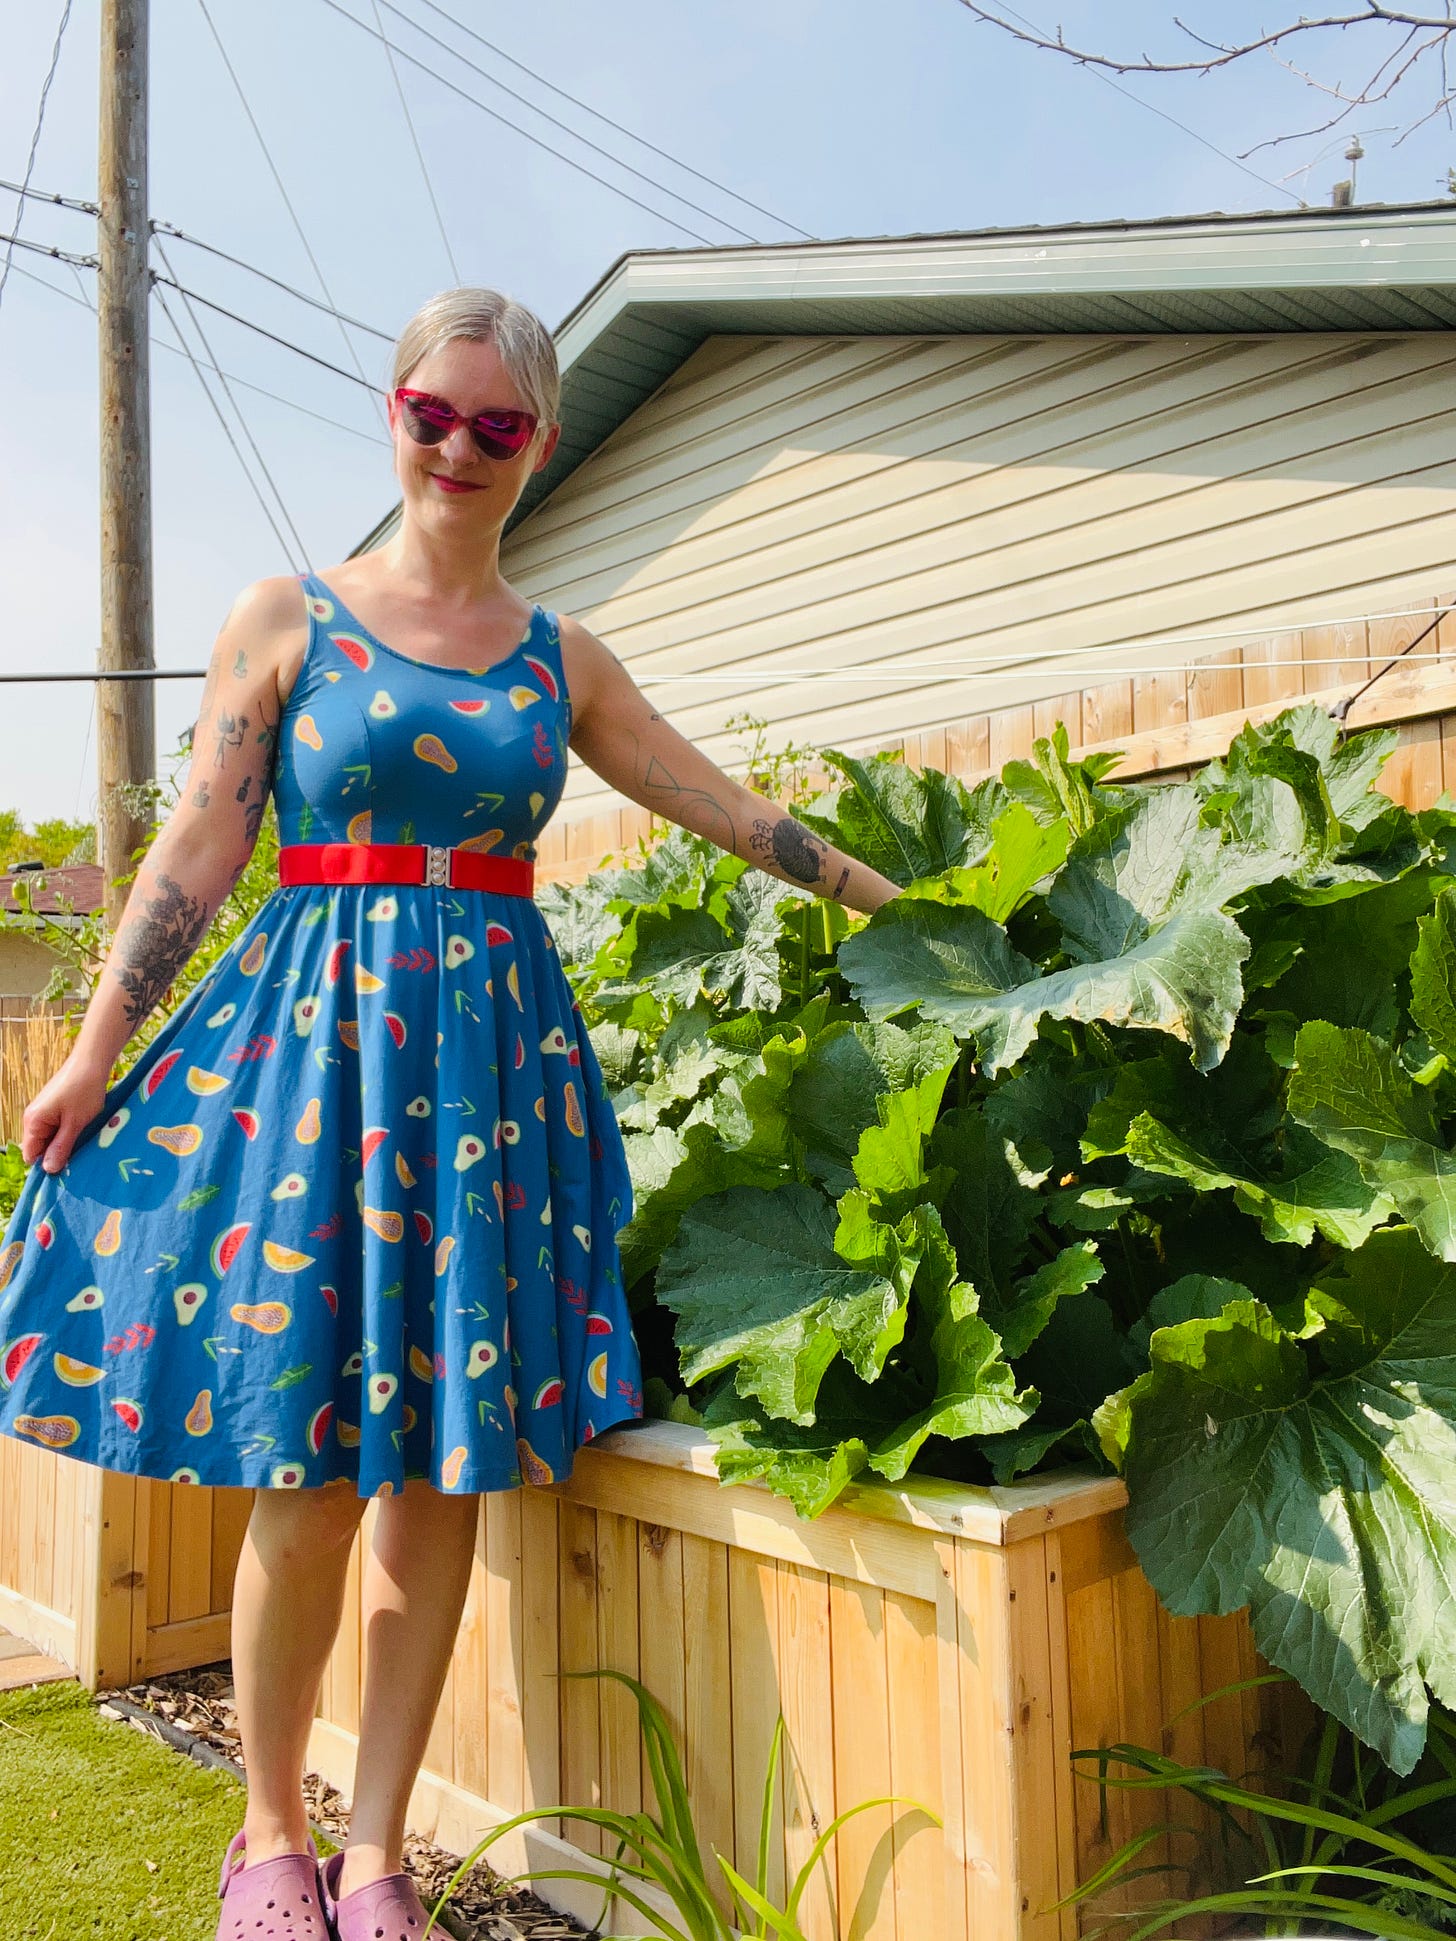 Photo of Jen wearing a blue dress with colourful veggie pattern standing next to the large zucchini plants.